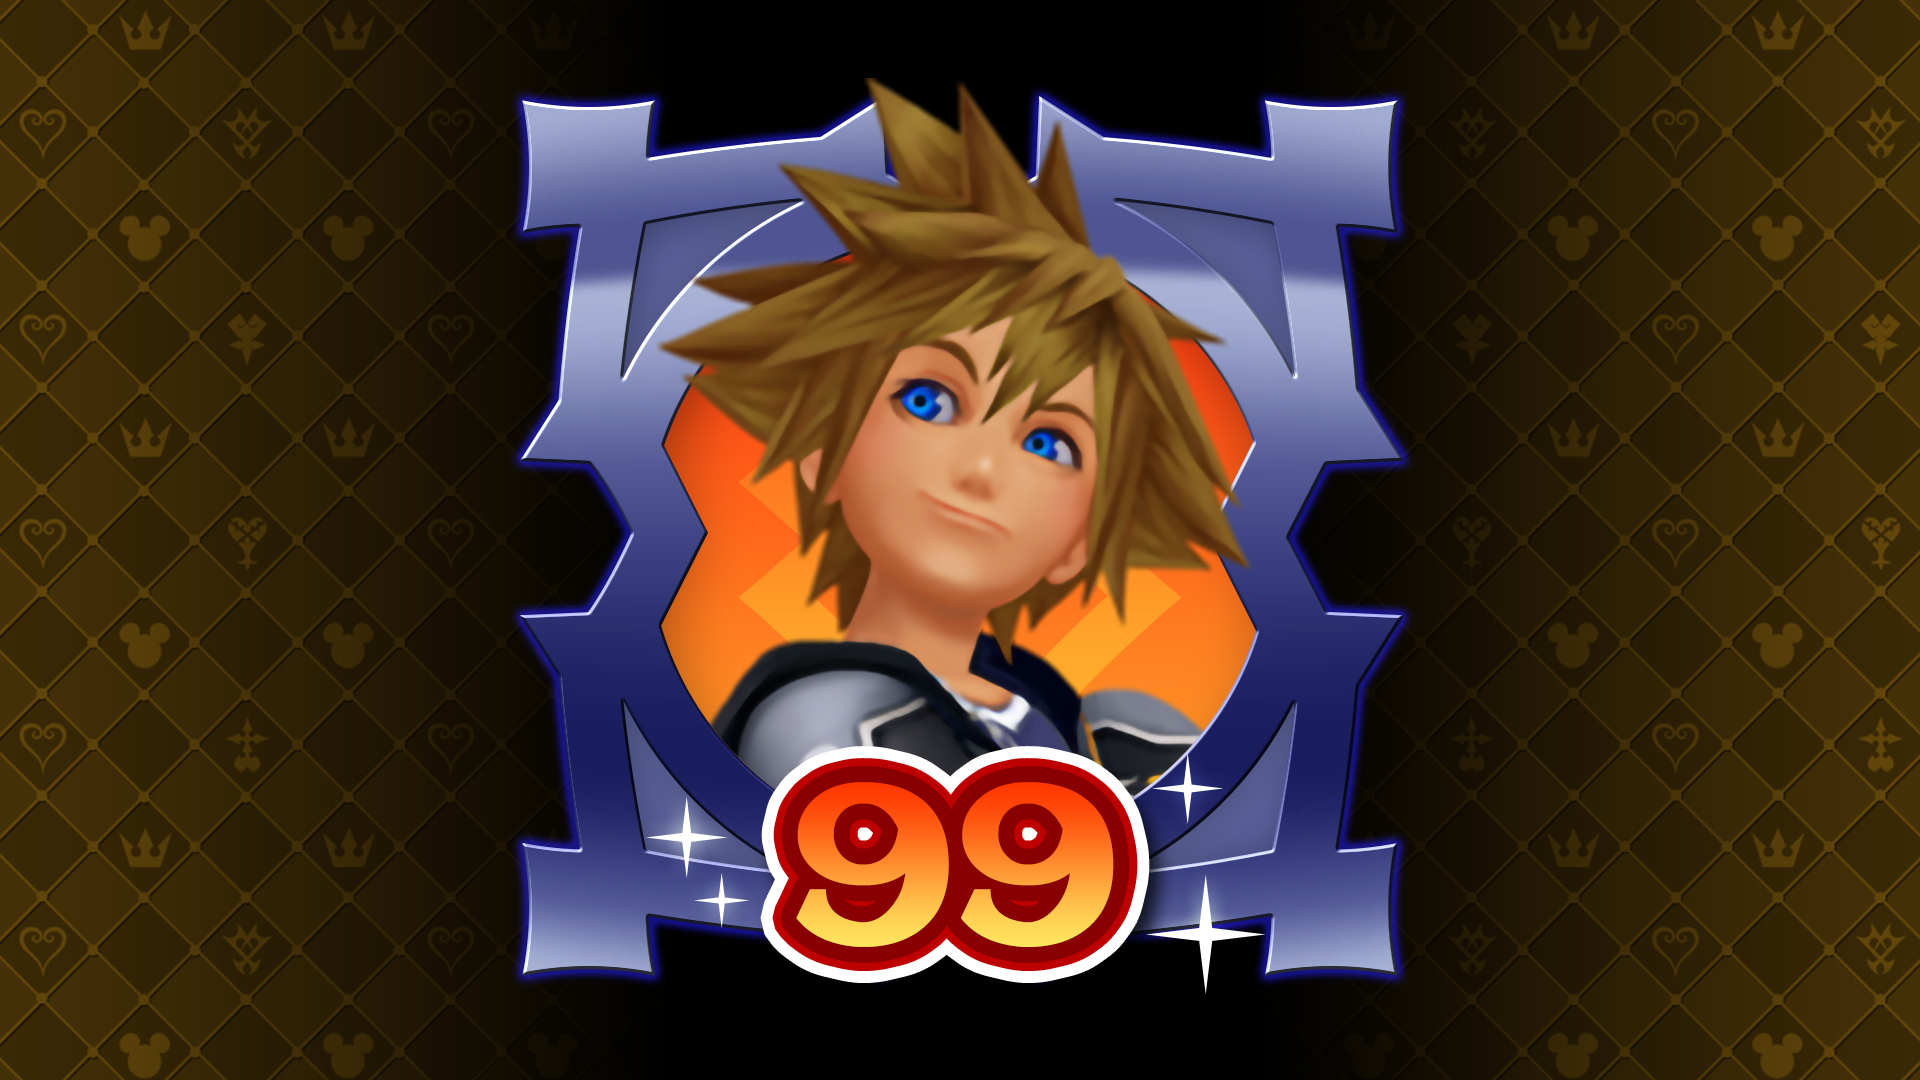 Icon for Level Master